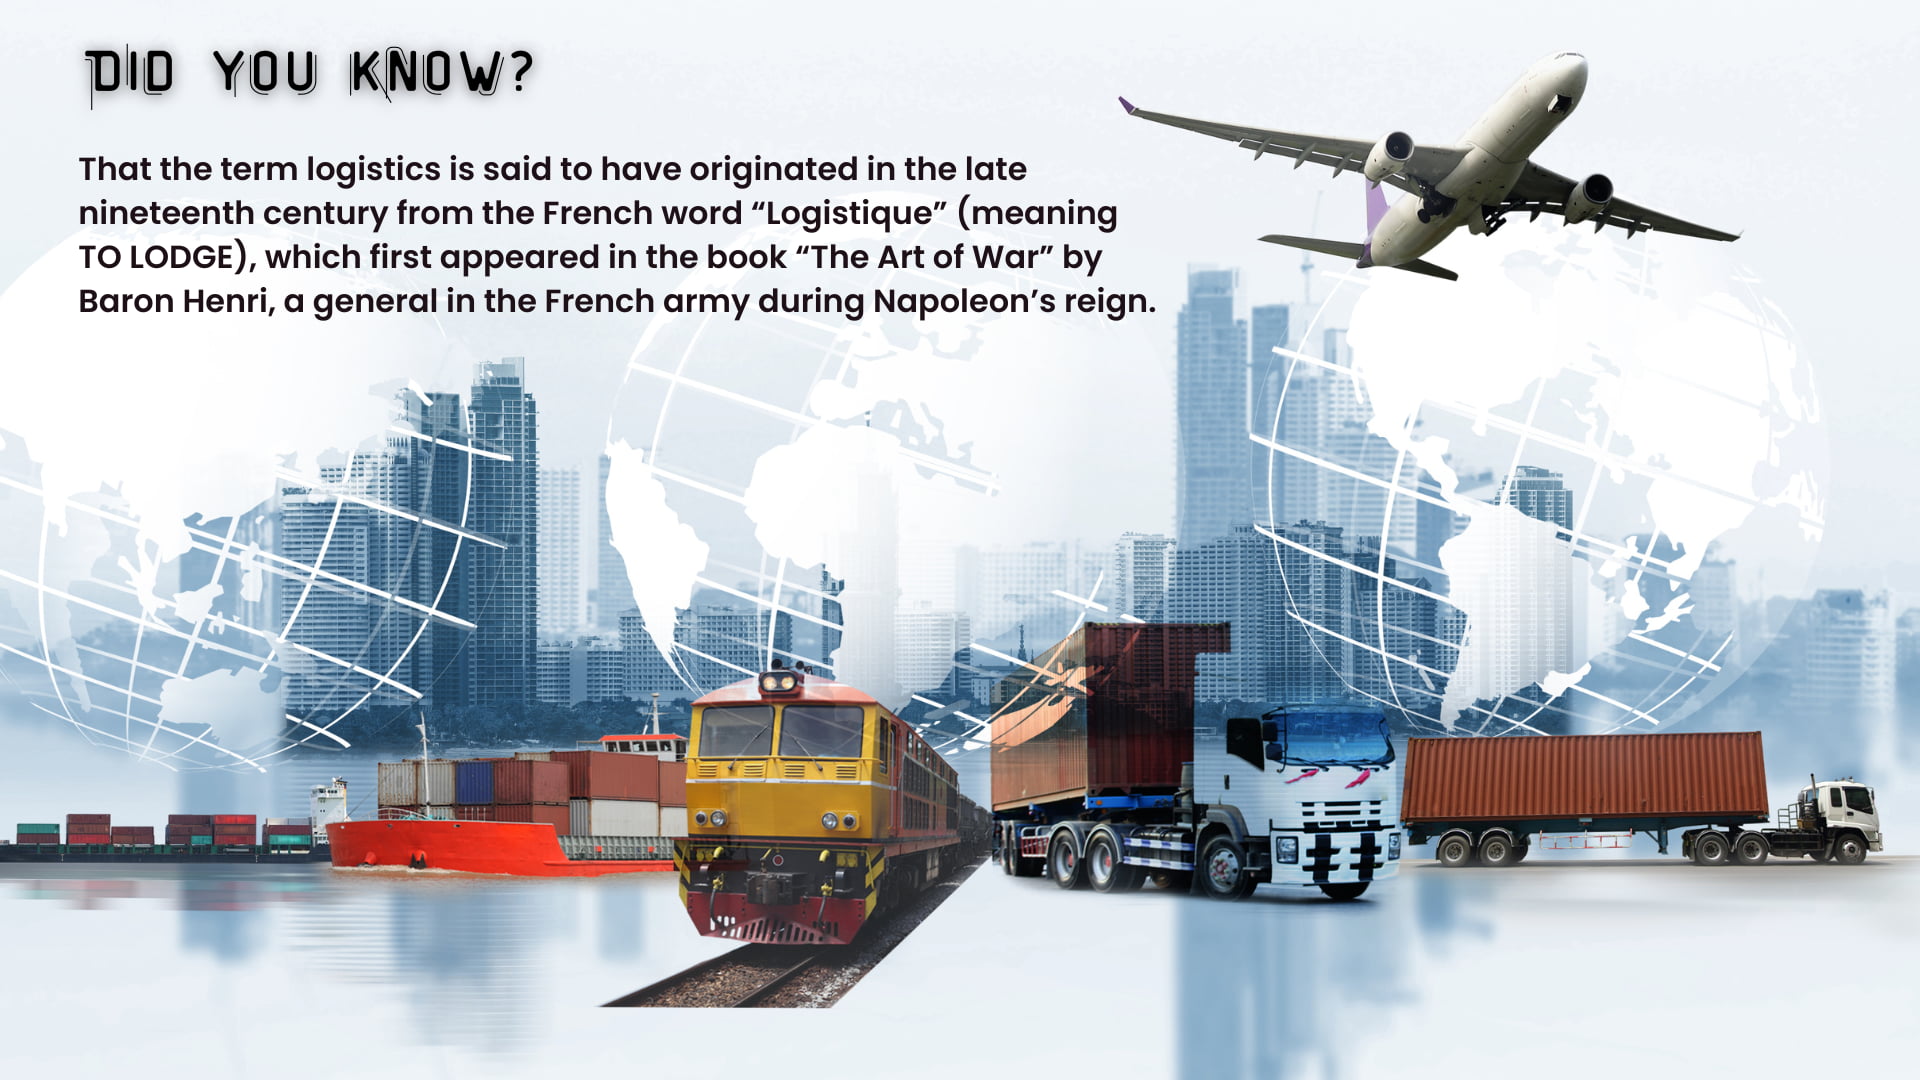 What does logistics means?